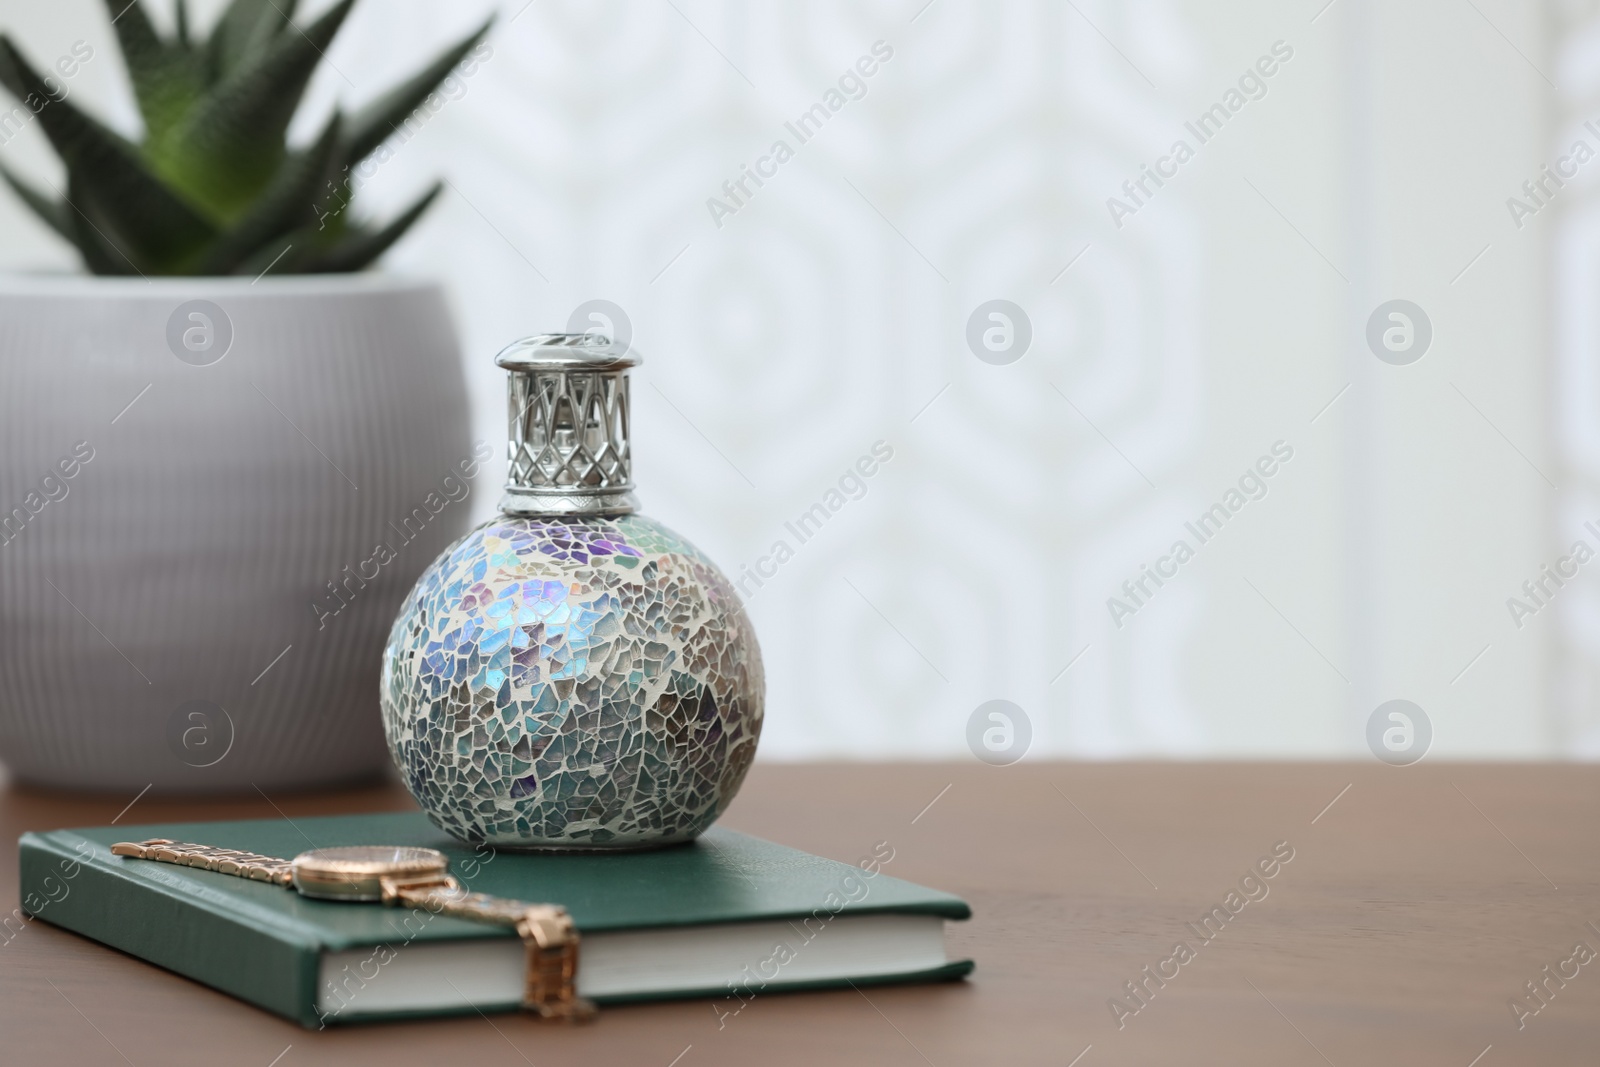 Photo of Burning catalytic purifying lamp, book and watch on wooden table, space for text